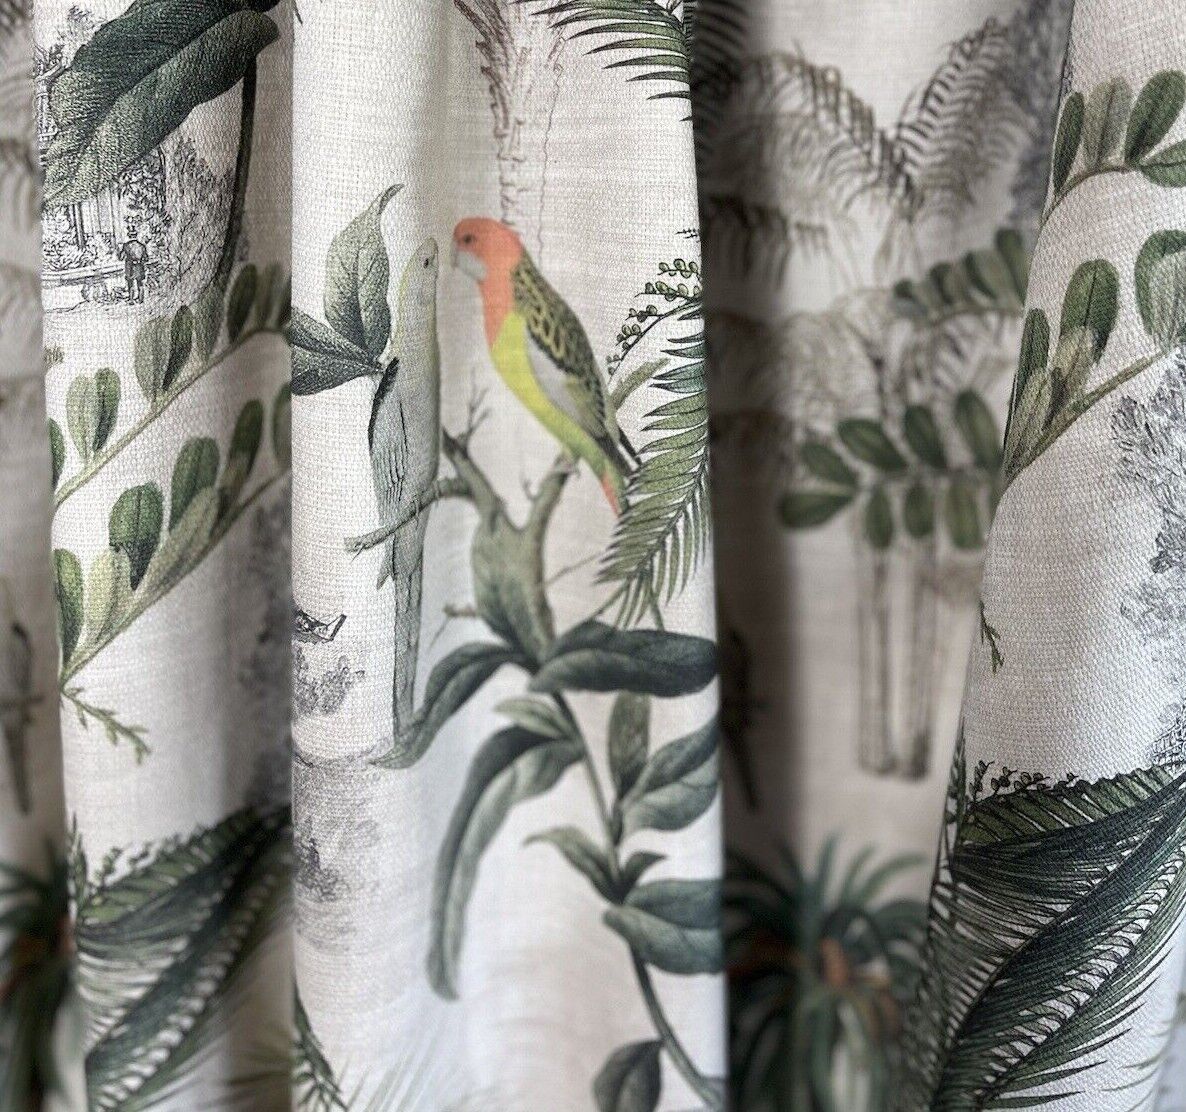 Pagoda Parrots Cotton Fabric by Meter Birds Sewing Material By Yards Meter's Japanese Motif Textile Vintage Style Canvas For Pillows Curtains Crafts